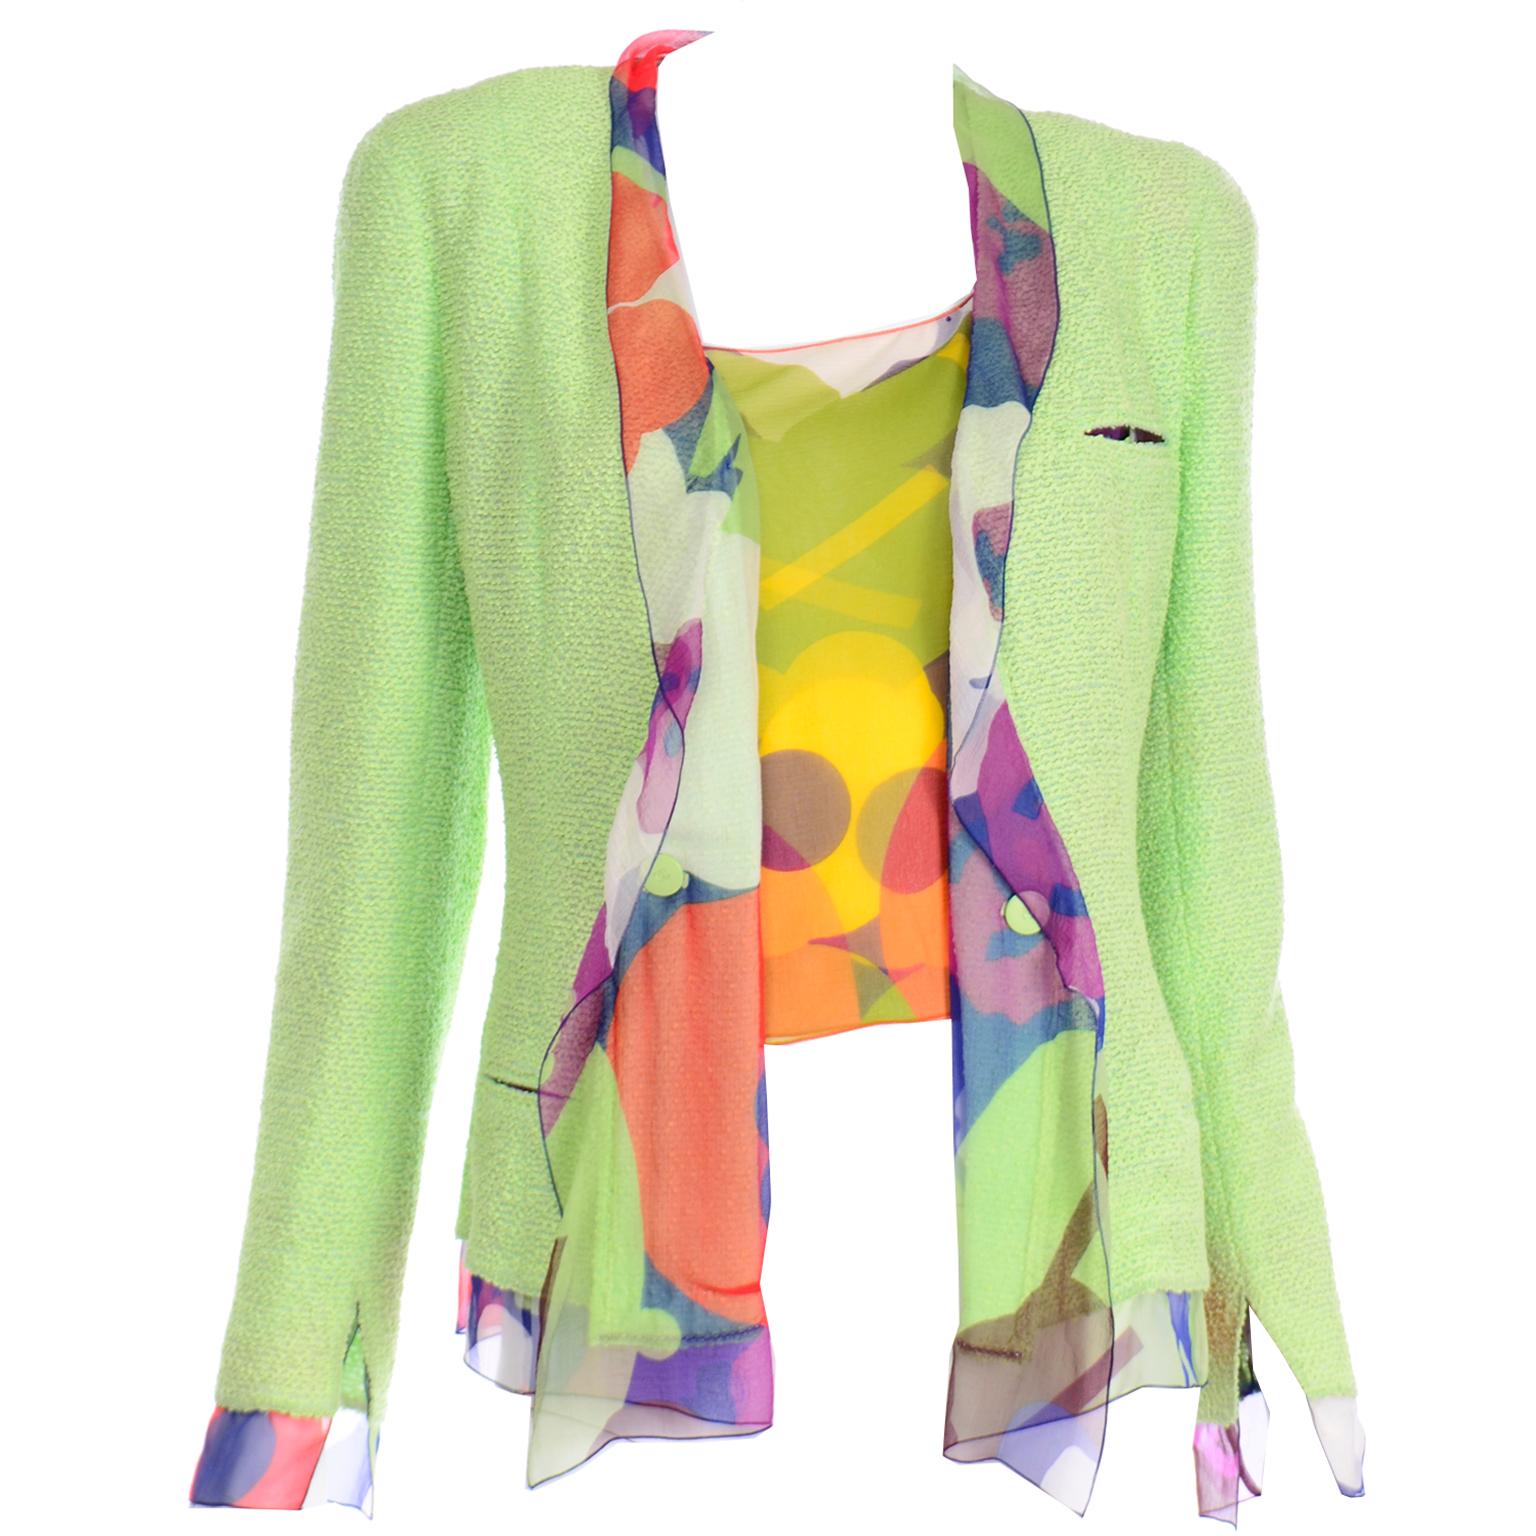 This colorful Spring Green Chanel jacket is in a beautiful bouclé and is lined with a floral silk chiffon. We are also including the floral silk top from the same collection that matches the inner lining of the jacket. The shoulders are structured